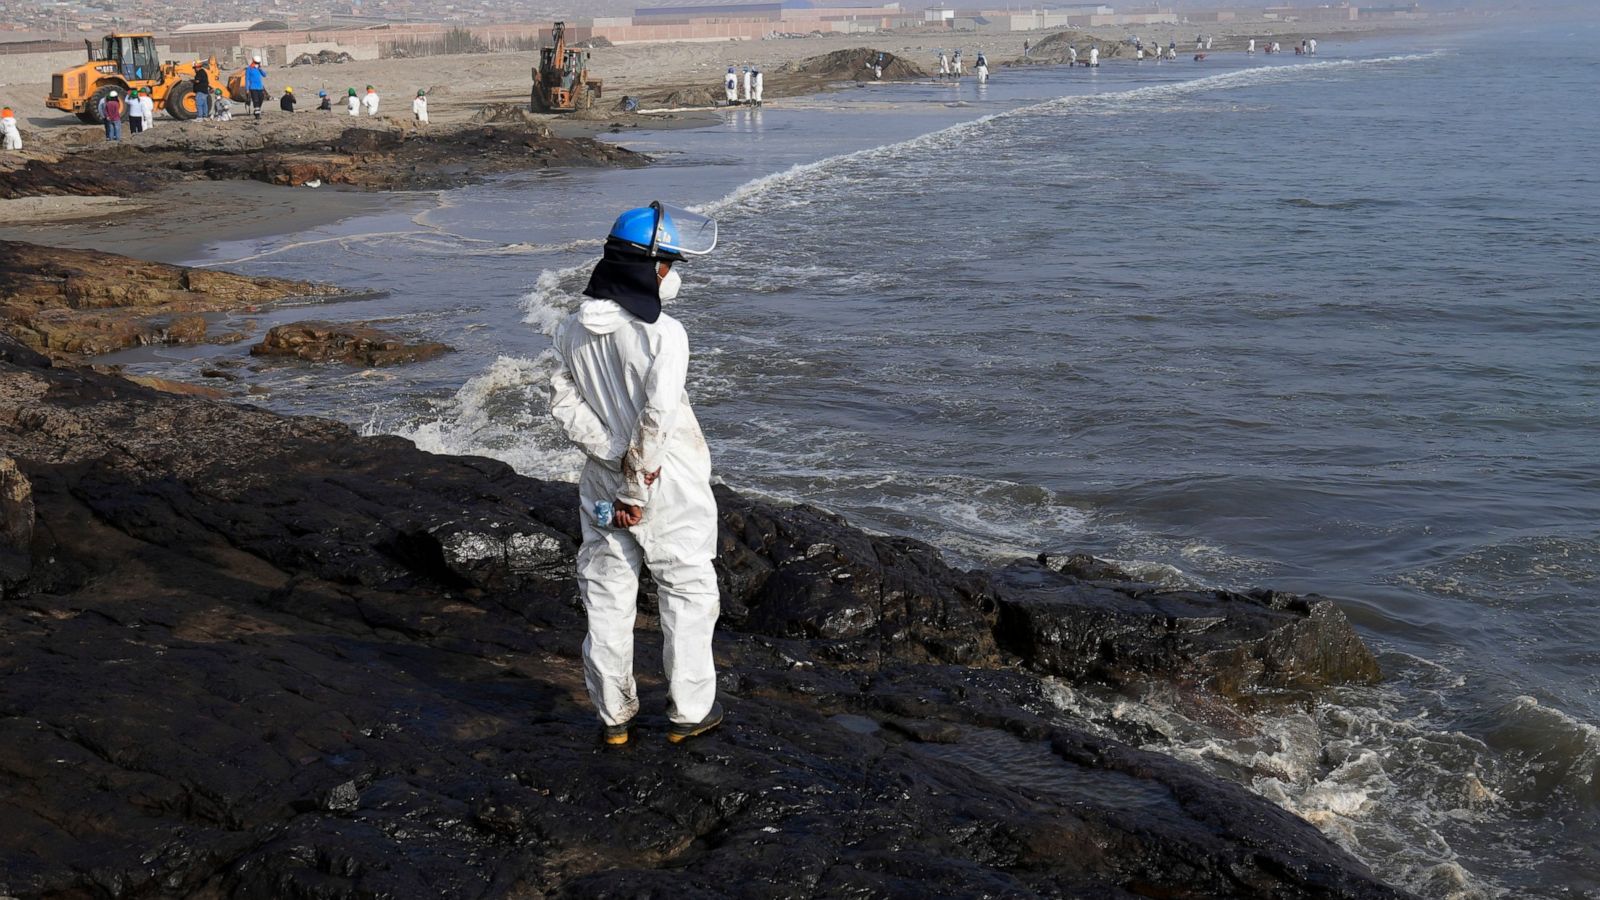 Waves from eruption in Tonga cause oil spill in Peru - ABC News